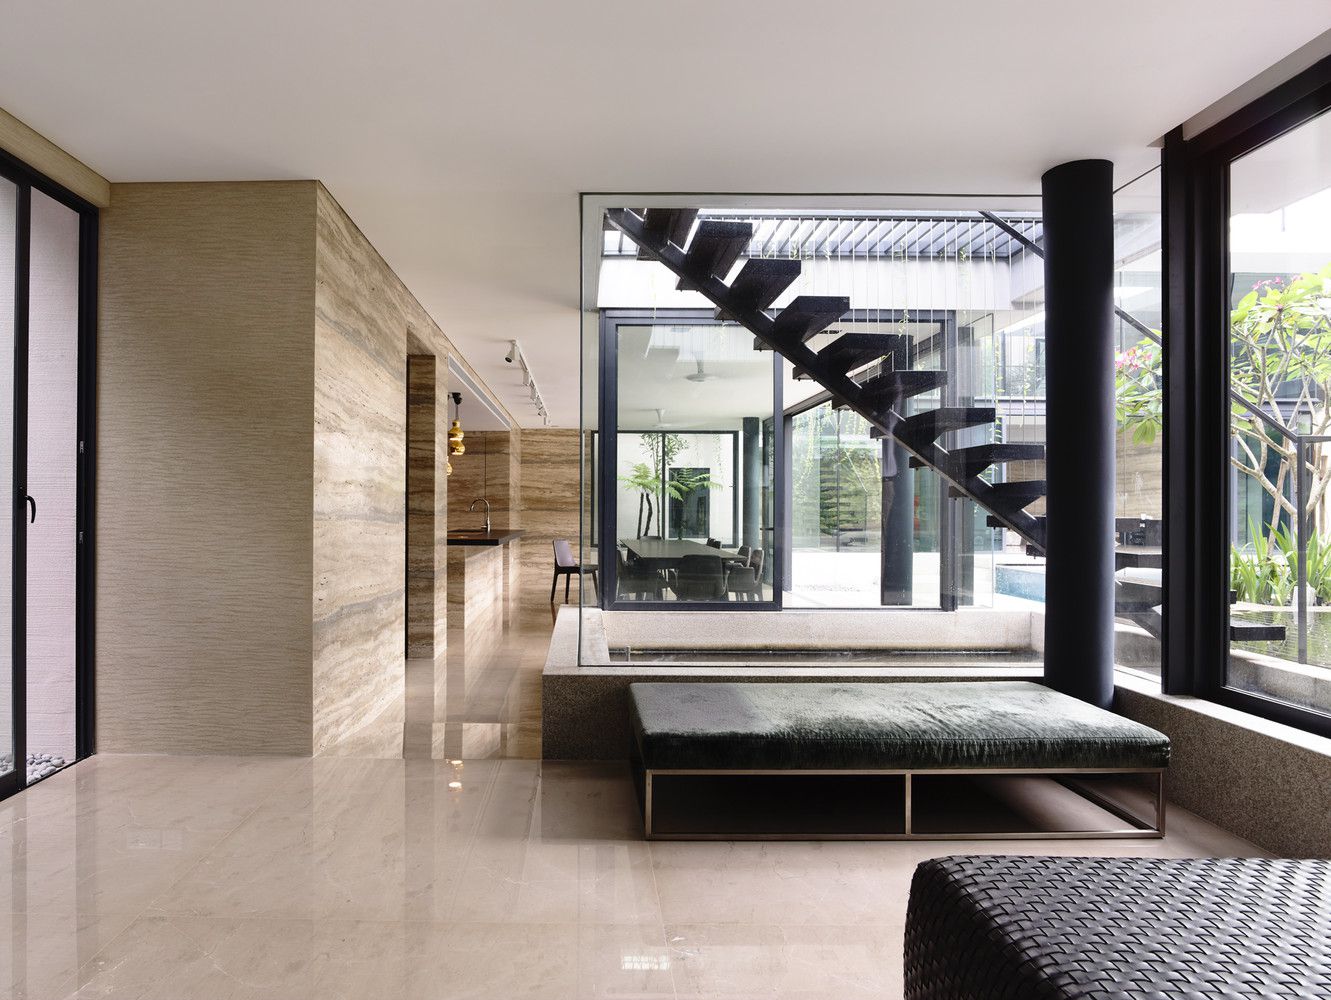 Andrew-Road-Contemporary-Residence-in-Singapore-by-A-D-LAB-12